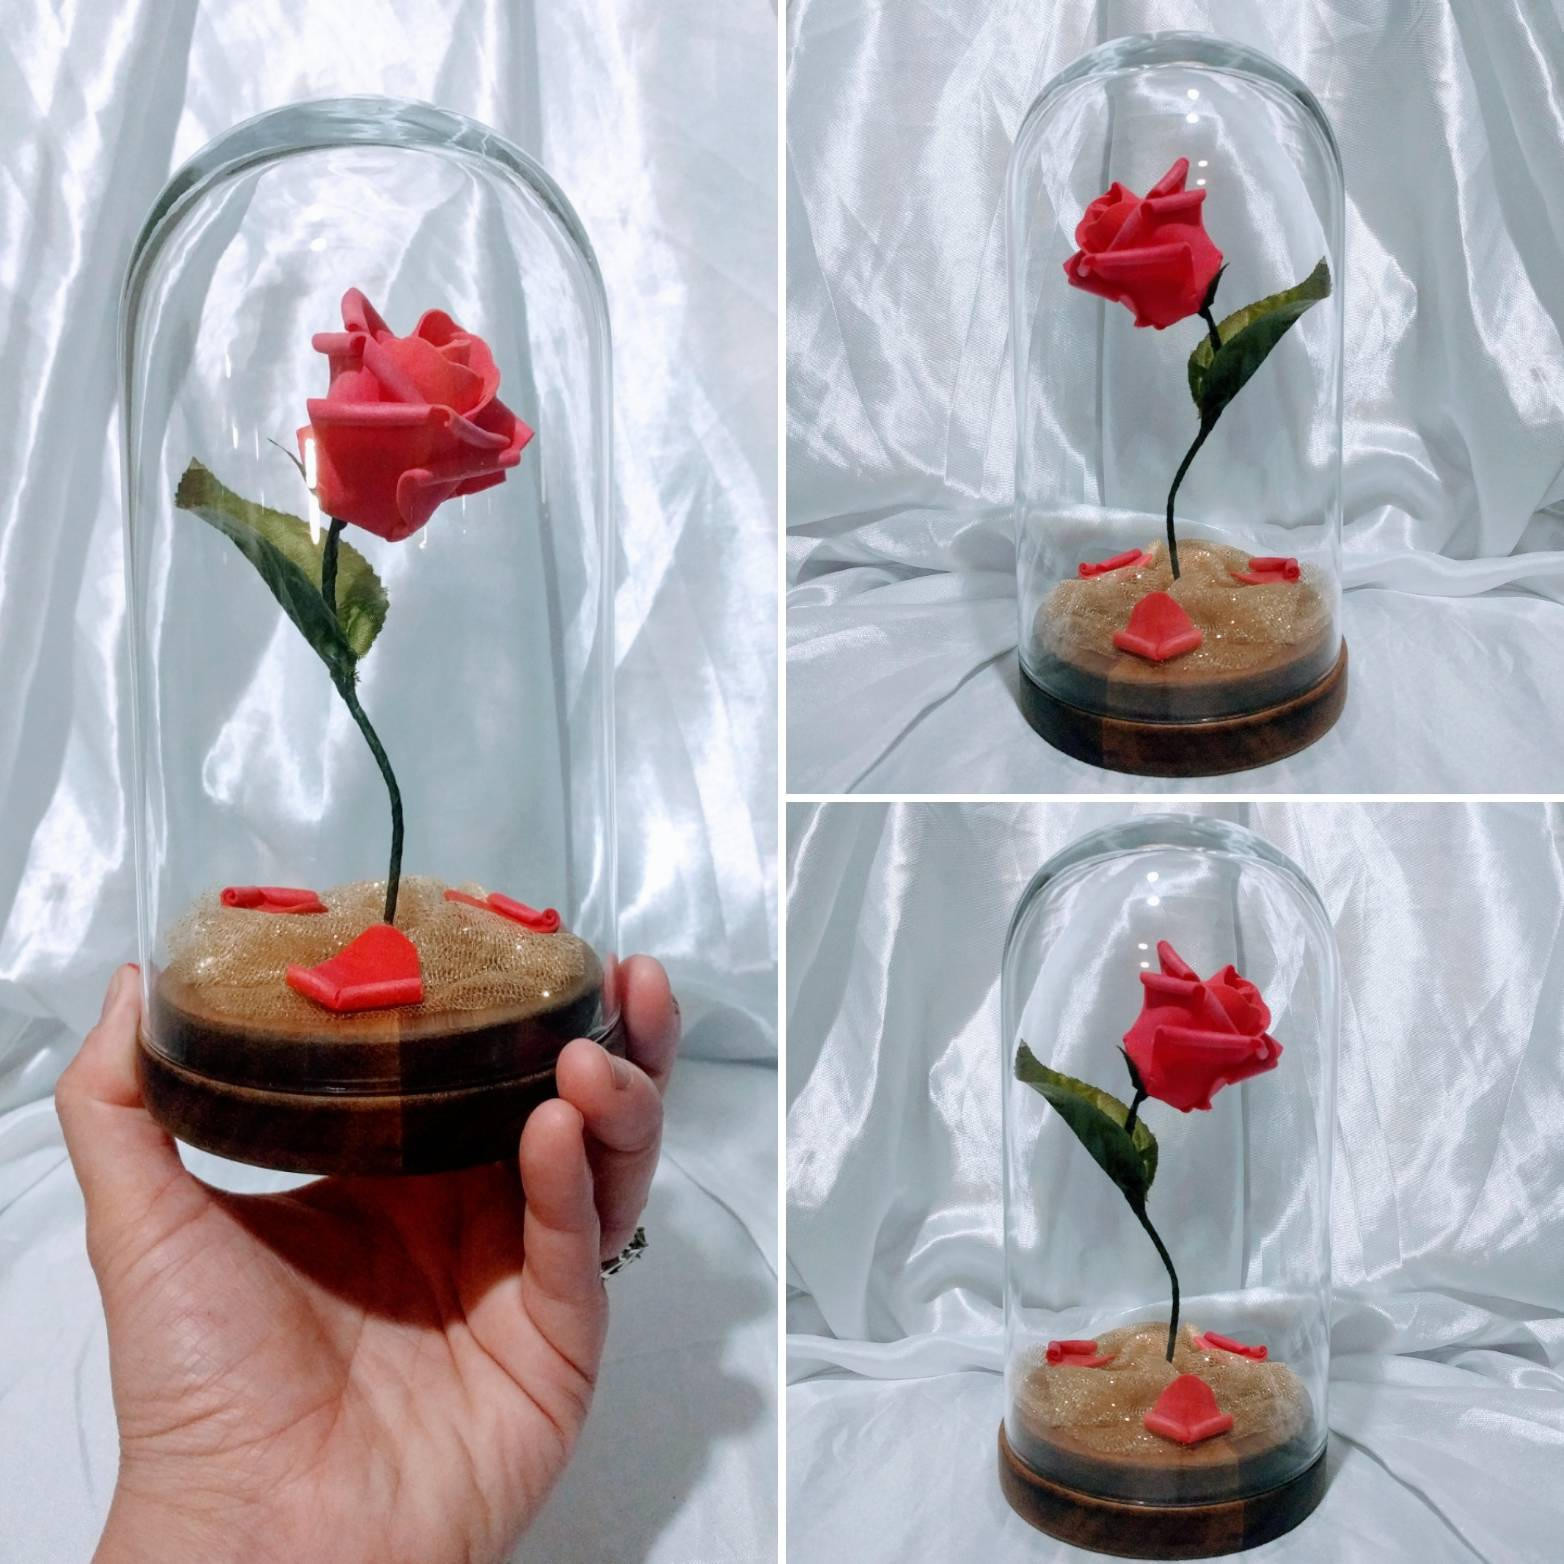 14 Stylish Flower Vase From Beauty and the Beast 2024 free download flower vase from beauty and the beast of party dacor party supplies paper party supplies within disneys beauty the beast inspired enchanted rose centerpiece or cake topper 7 inches